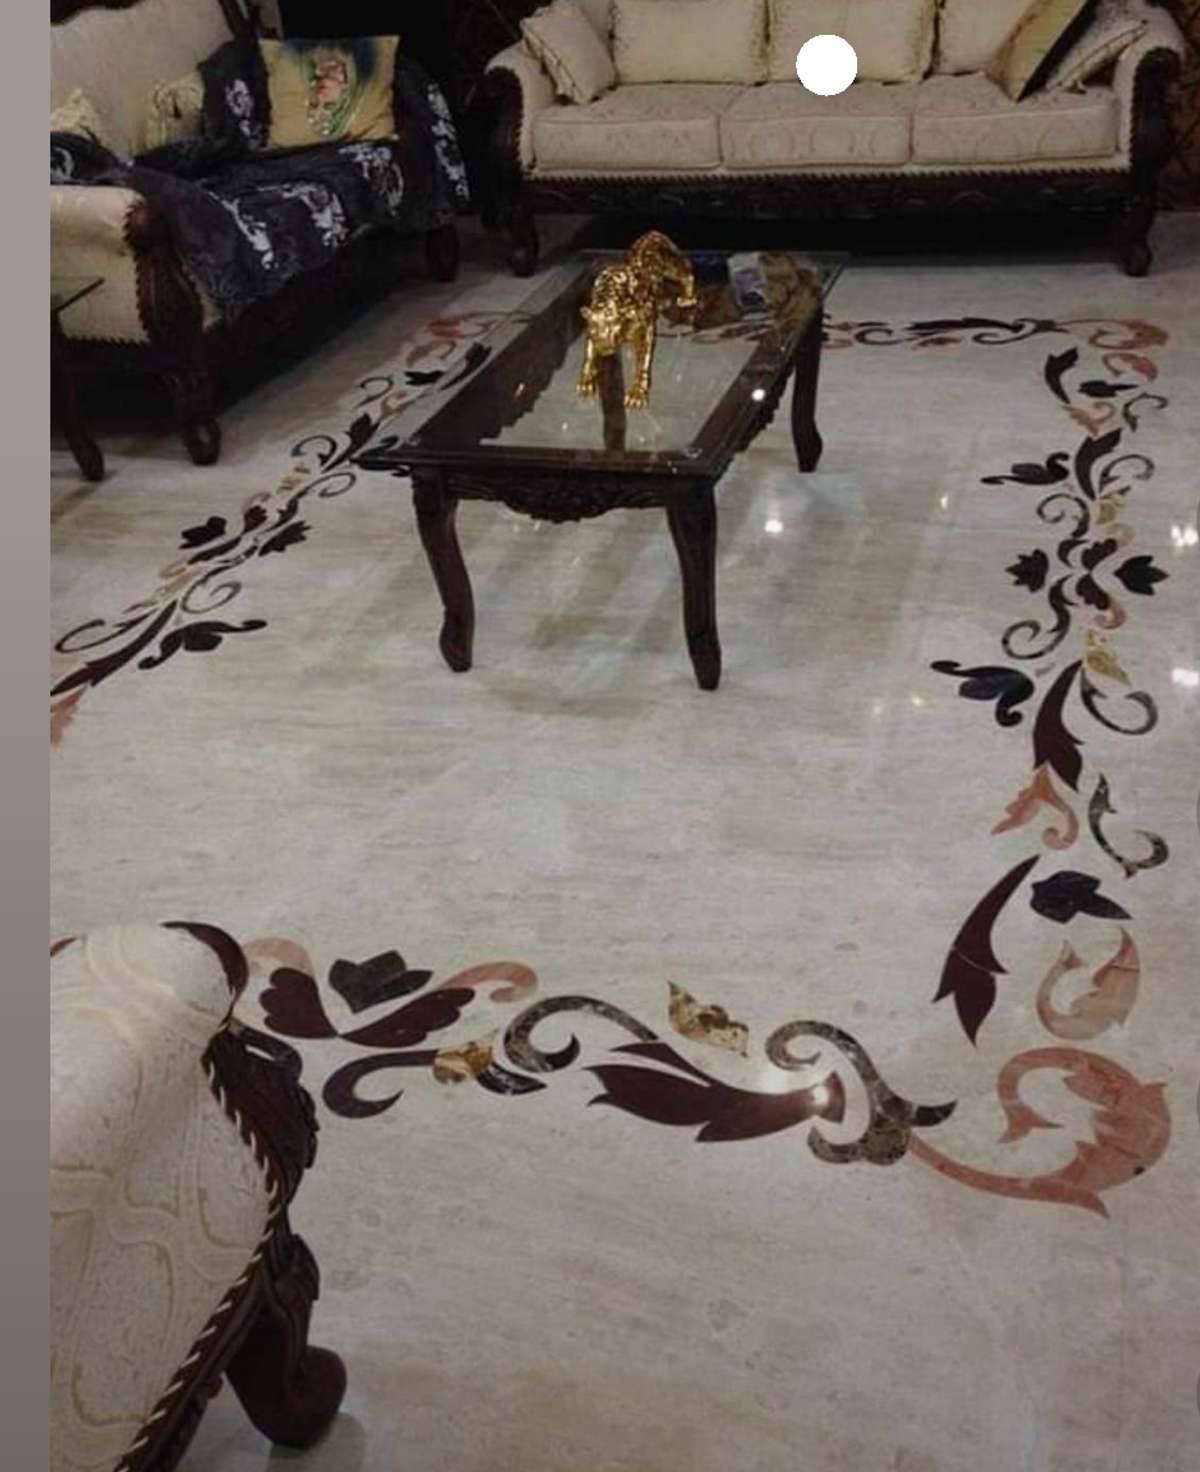 sir marble flooring inlay work ki koi requirement ho to please contact me 706038.8556